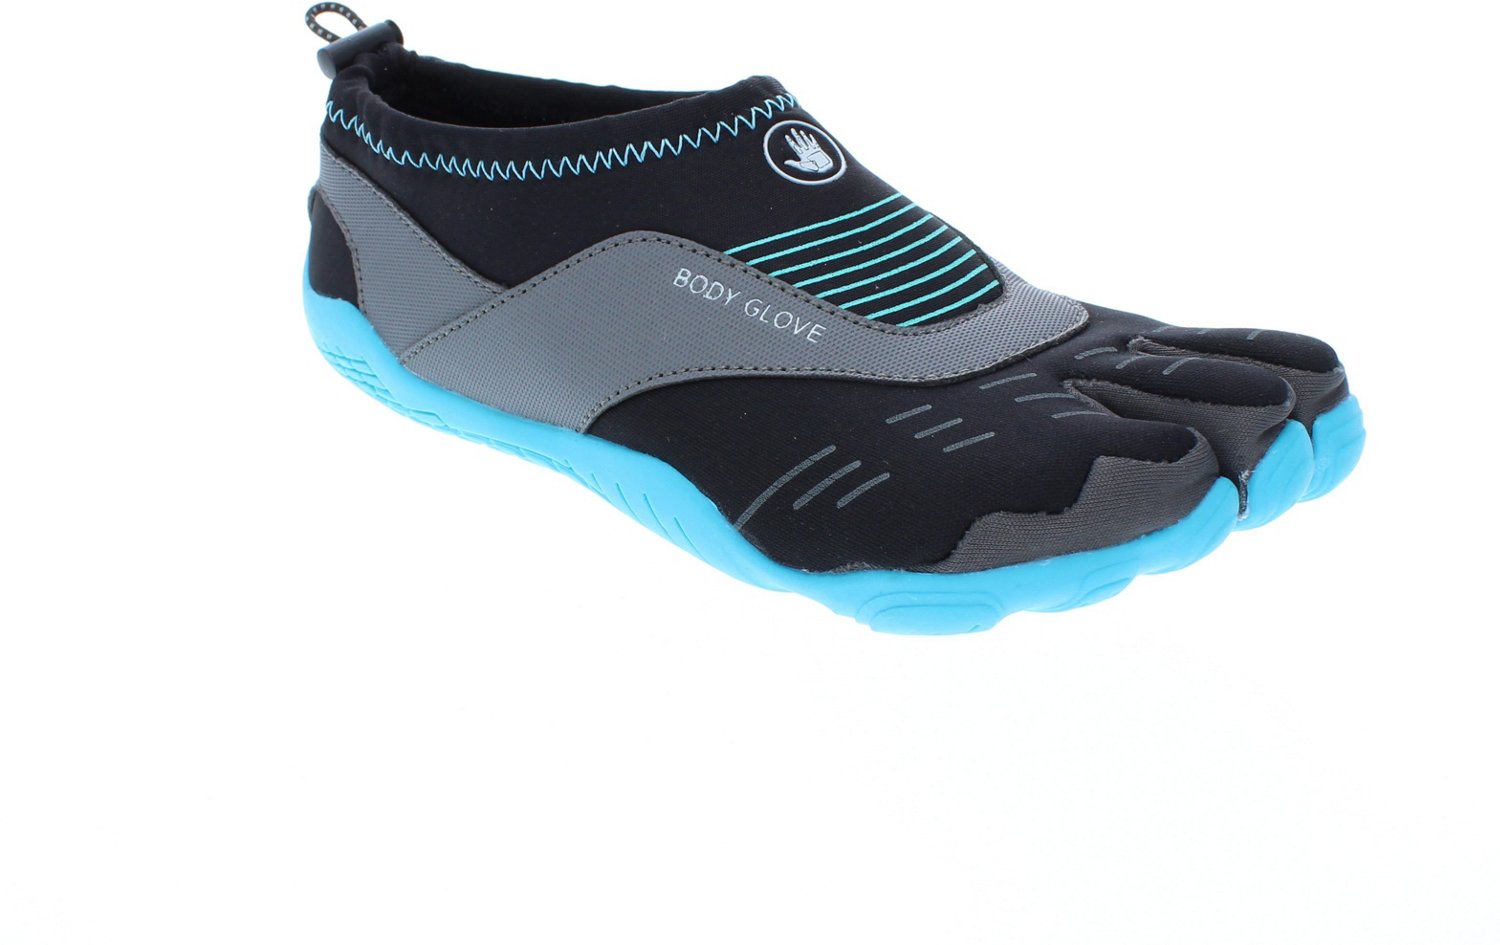 mens water shoes academy